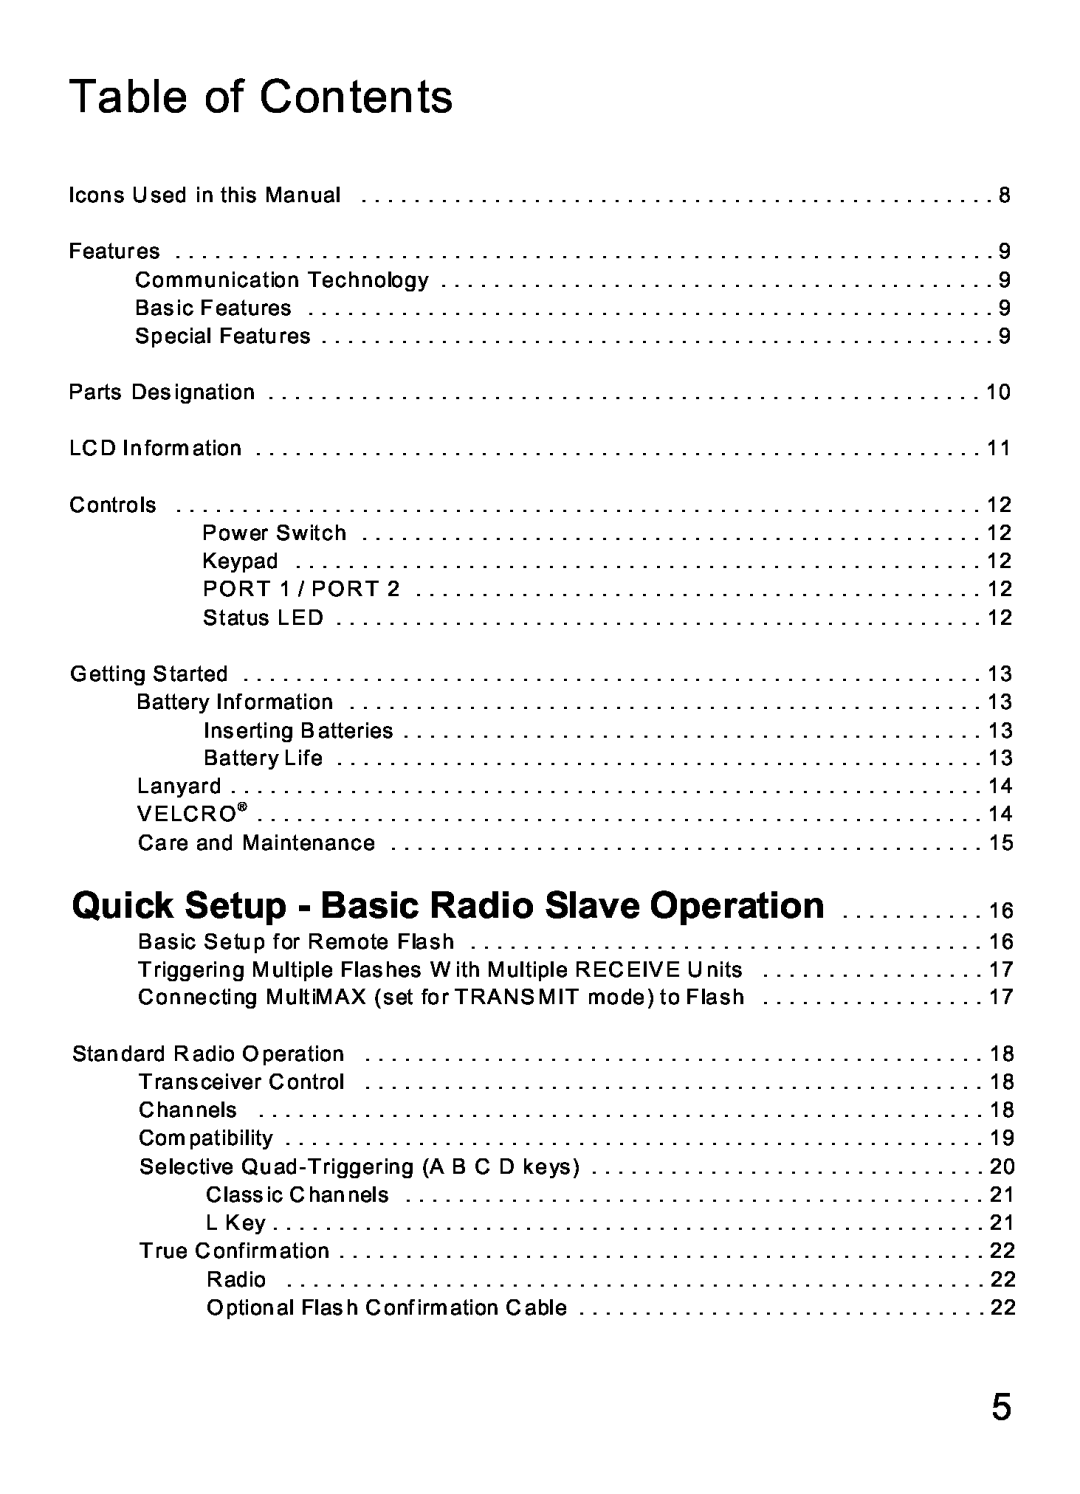 MaxTech Transceiver manual Table of Contents, Quick Setup - Basic Radio Slave Operation 